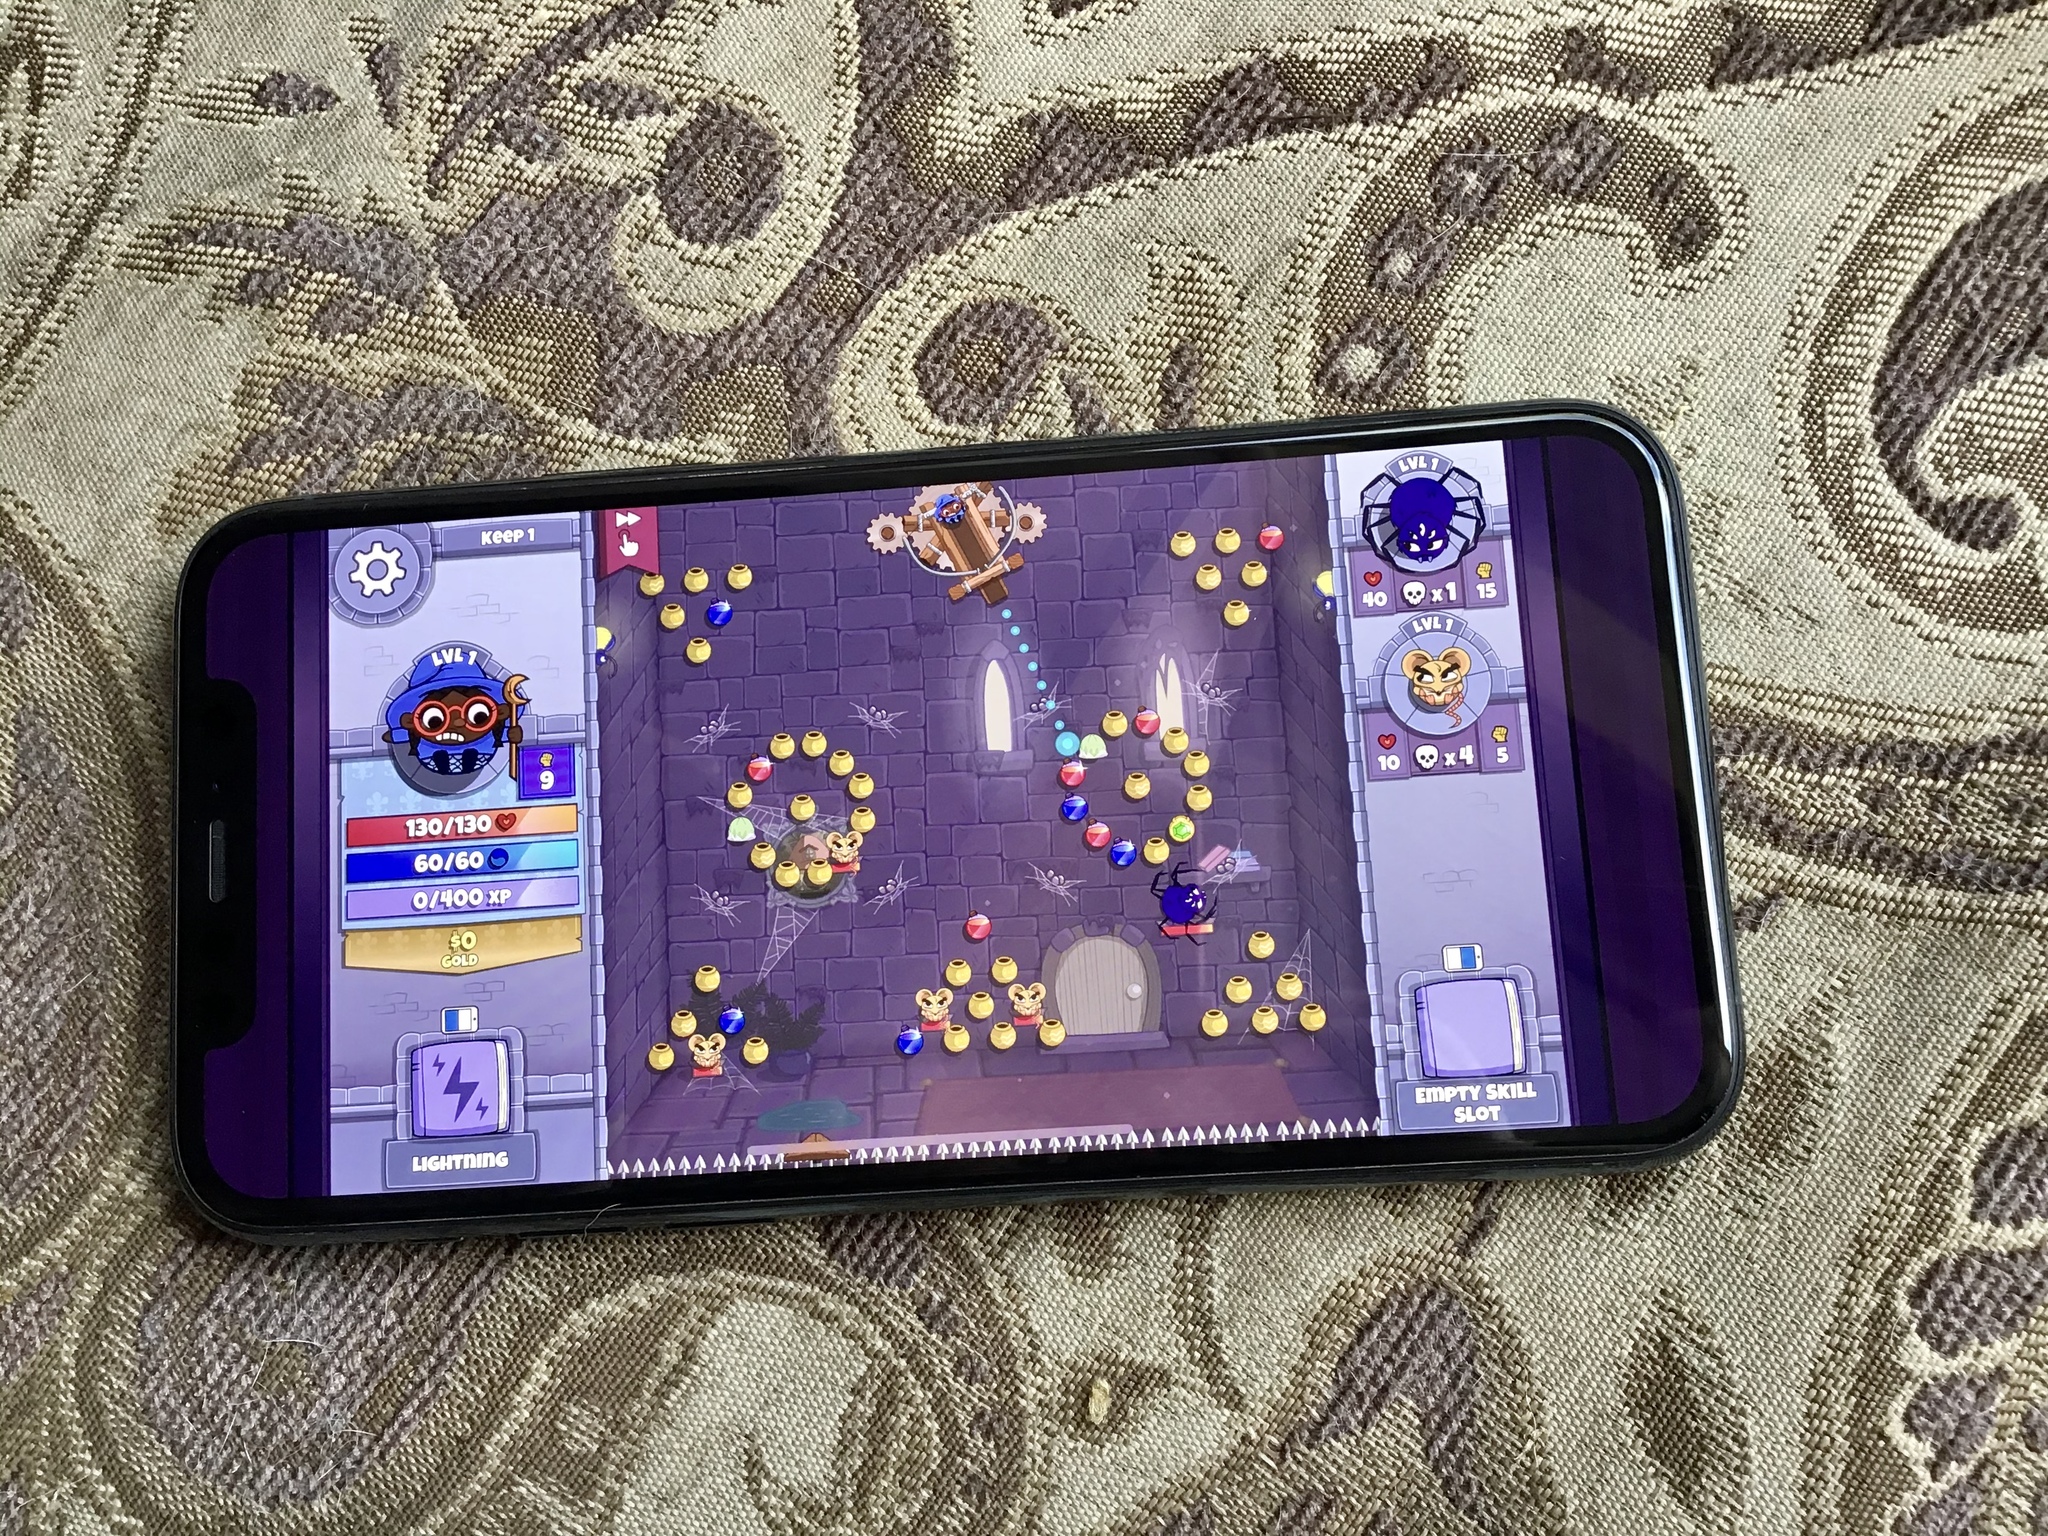 We review Roundguard, a new Peggle RPG mashup on Apple Arcade